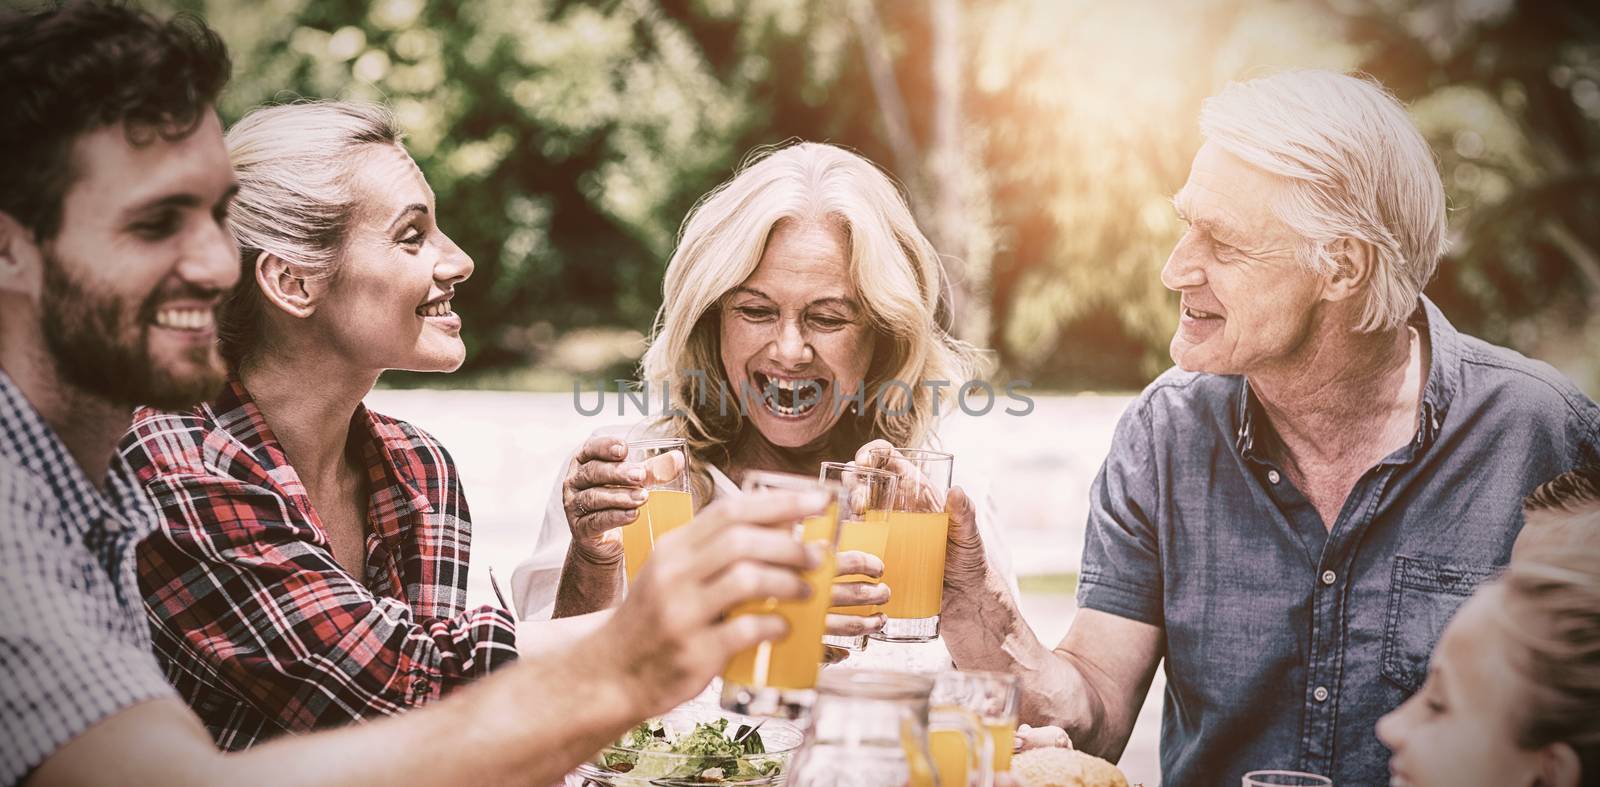 Smiling family toasting juice at table in yard 